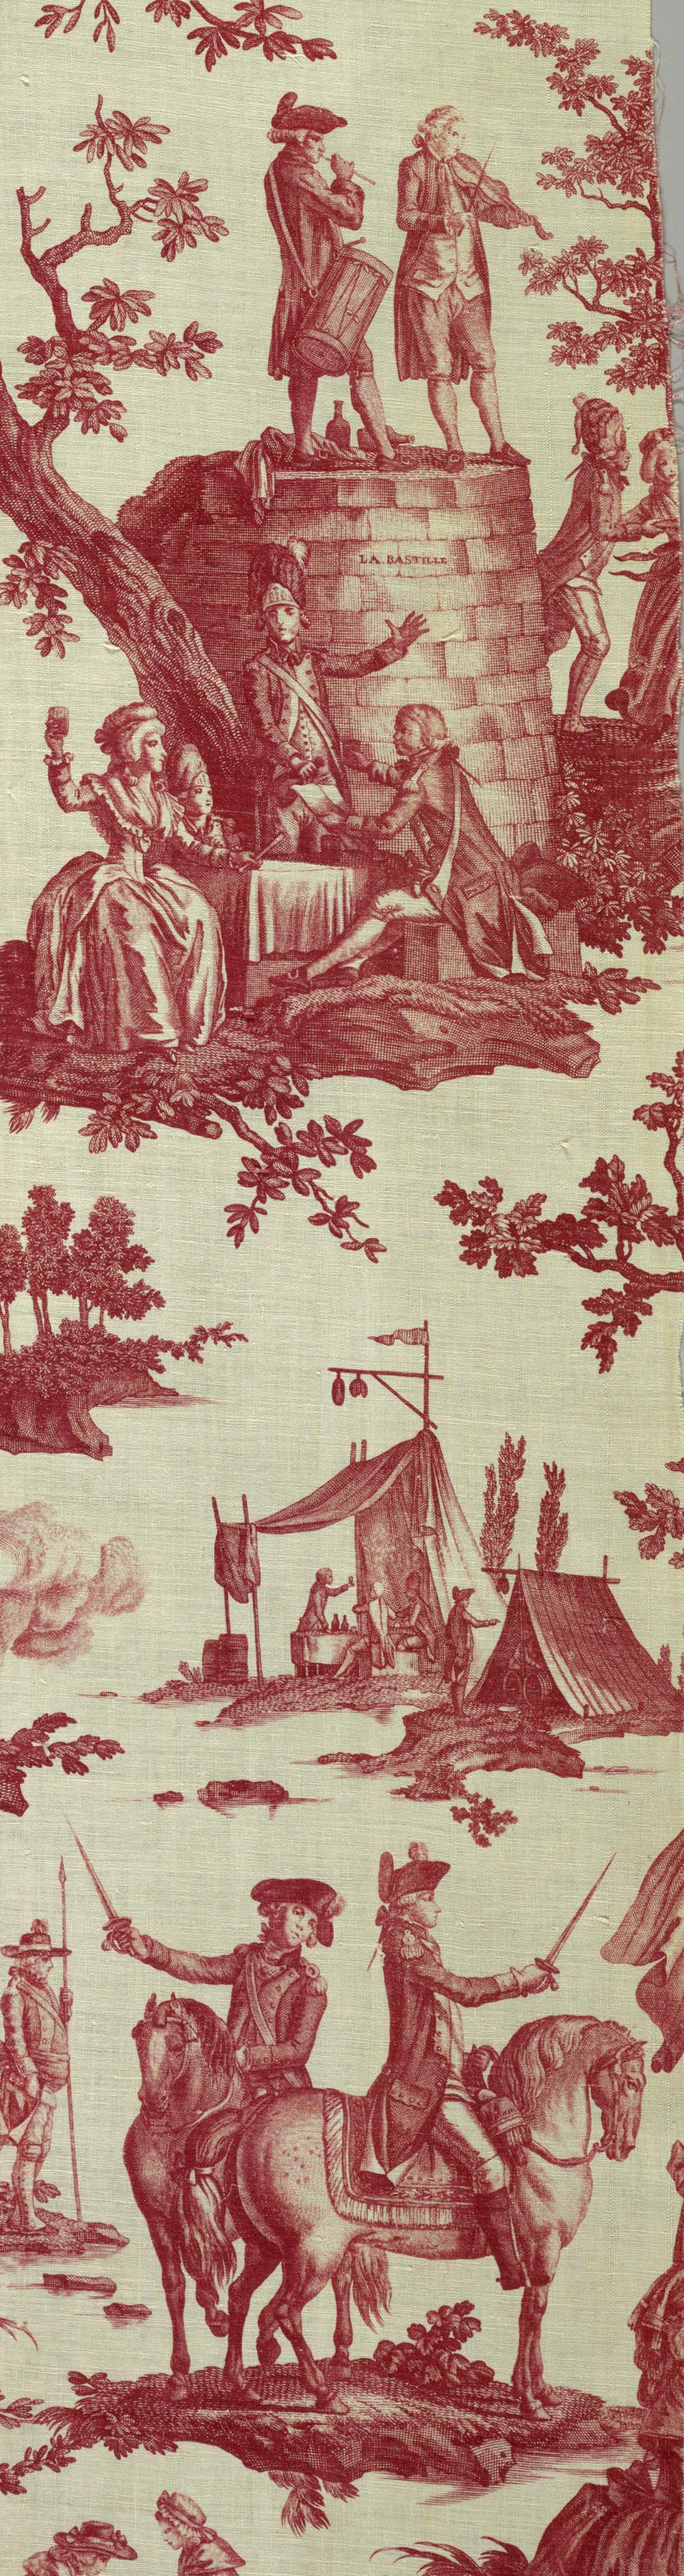 Textile embroidered with celebratory scenes from the Revolution.